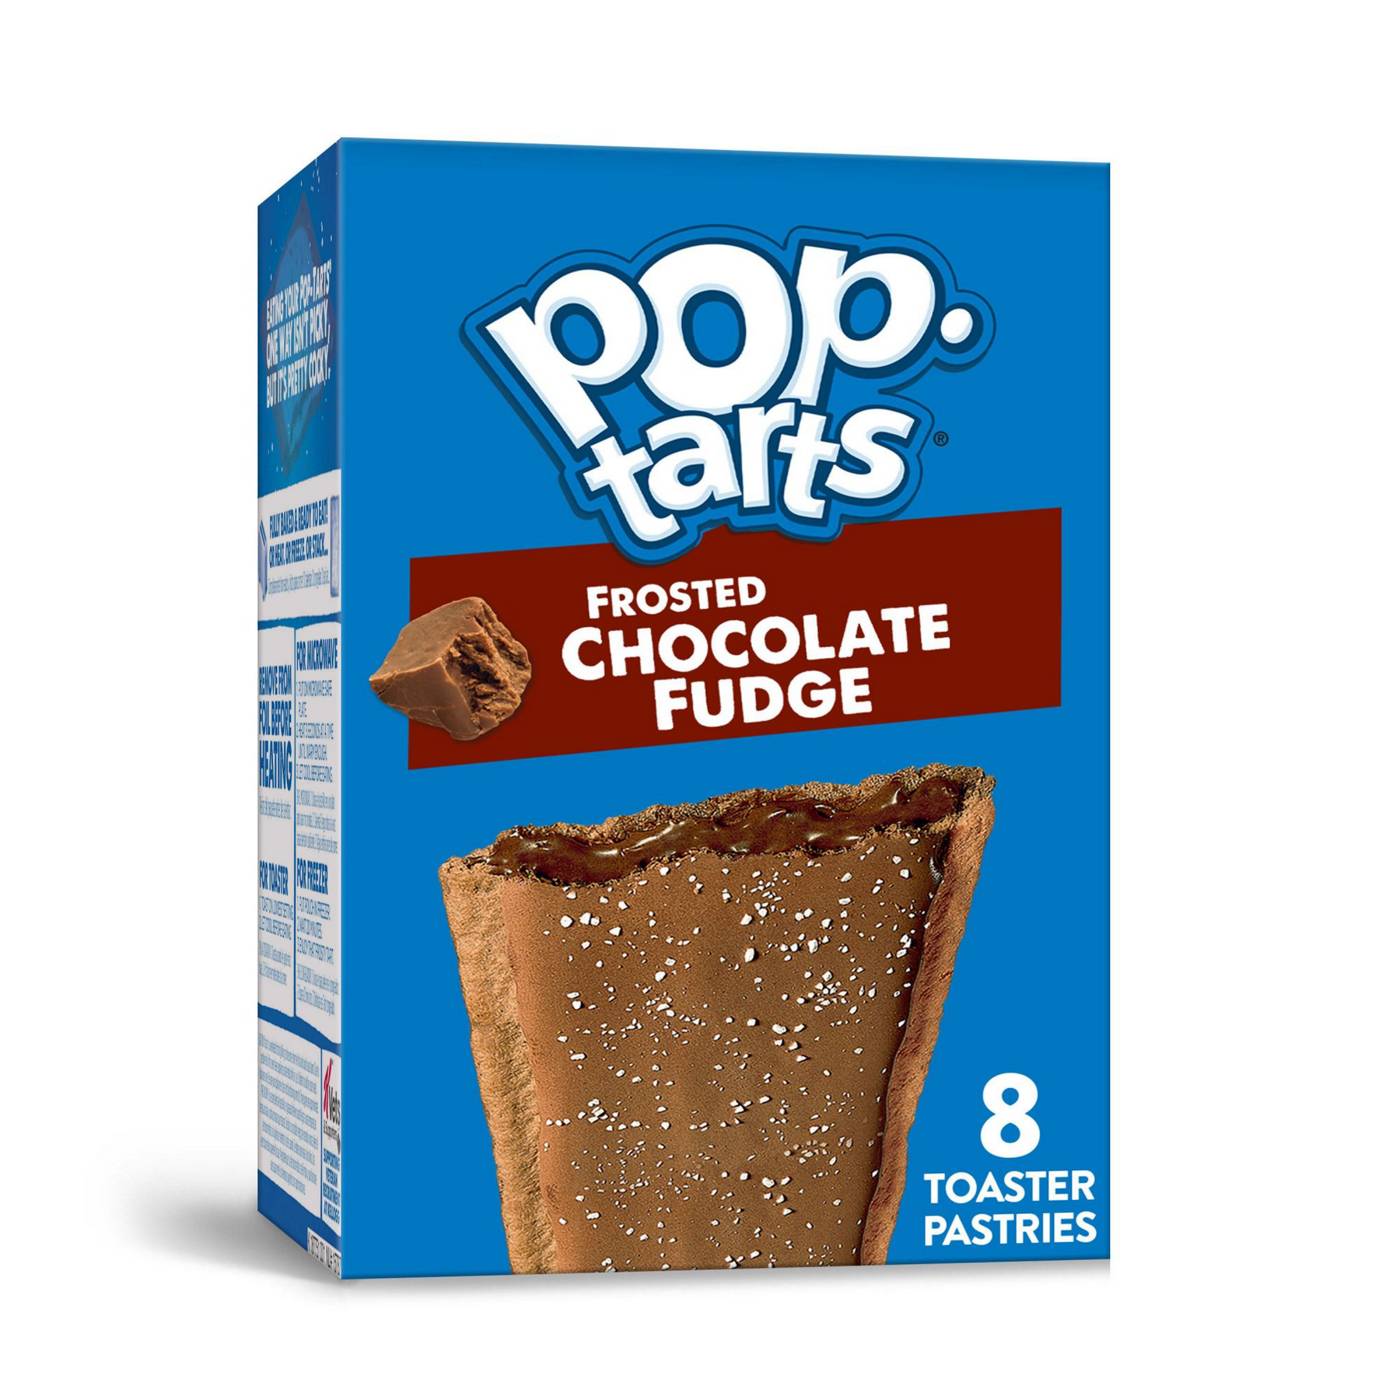 Pop-Tarts Frosted Chocolate Fudge Toaster Pastries; image 6 of 7